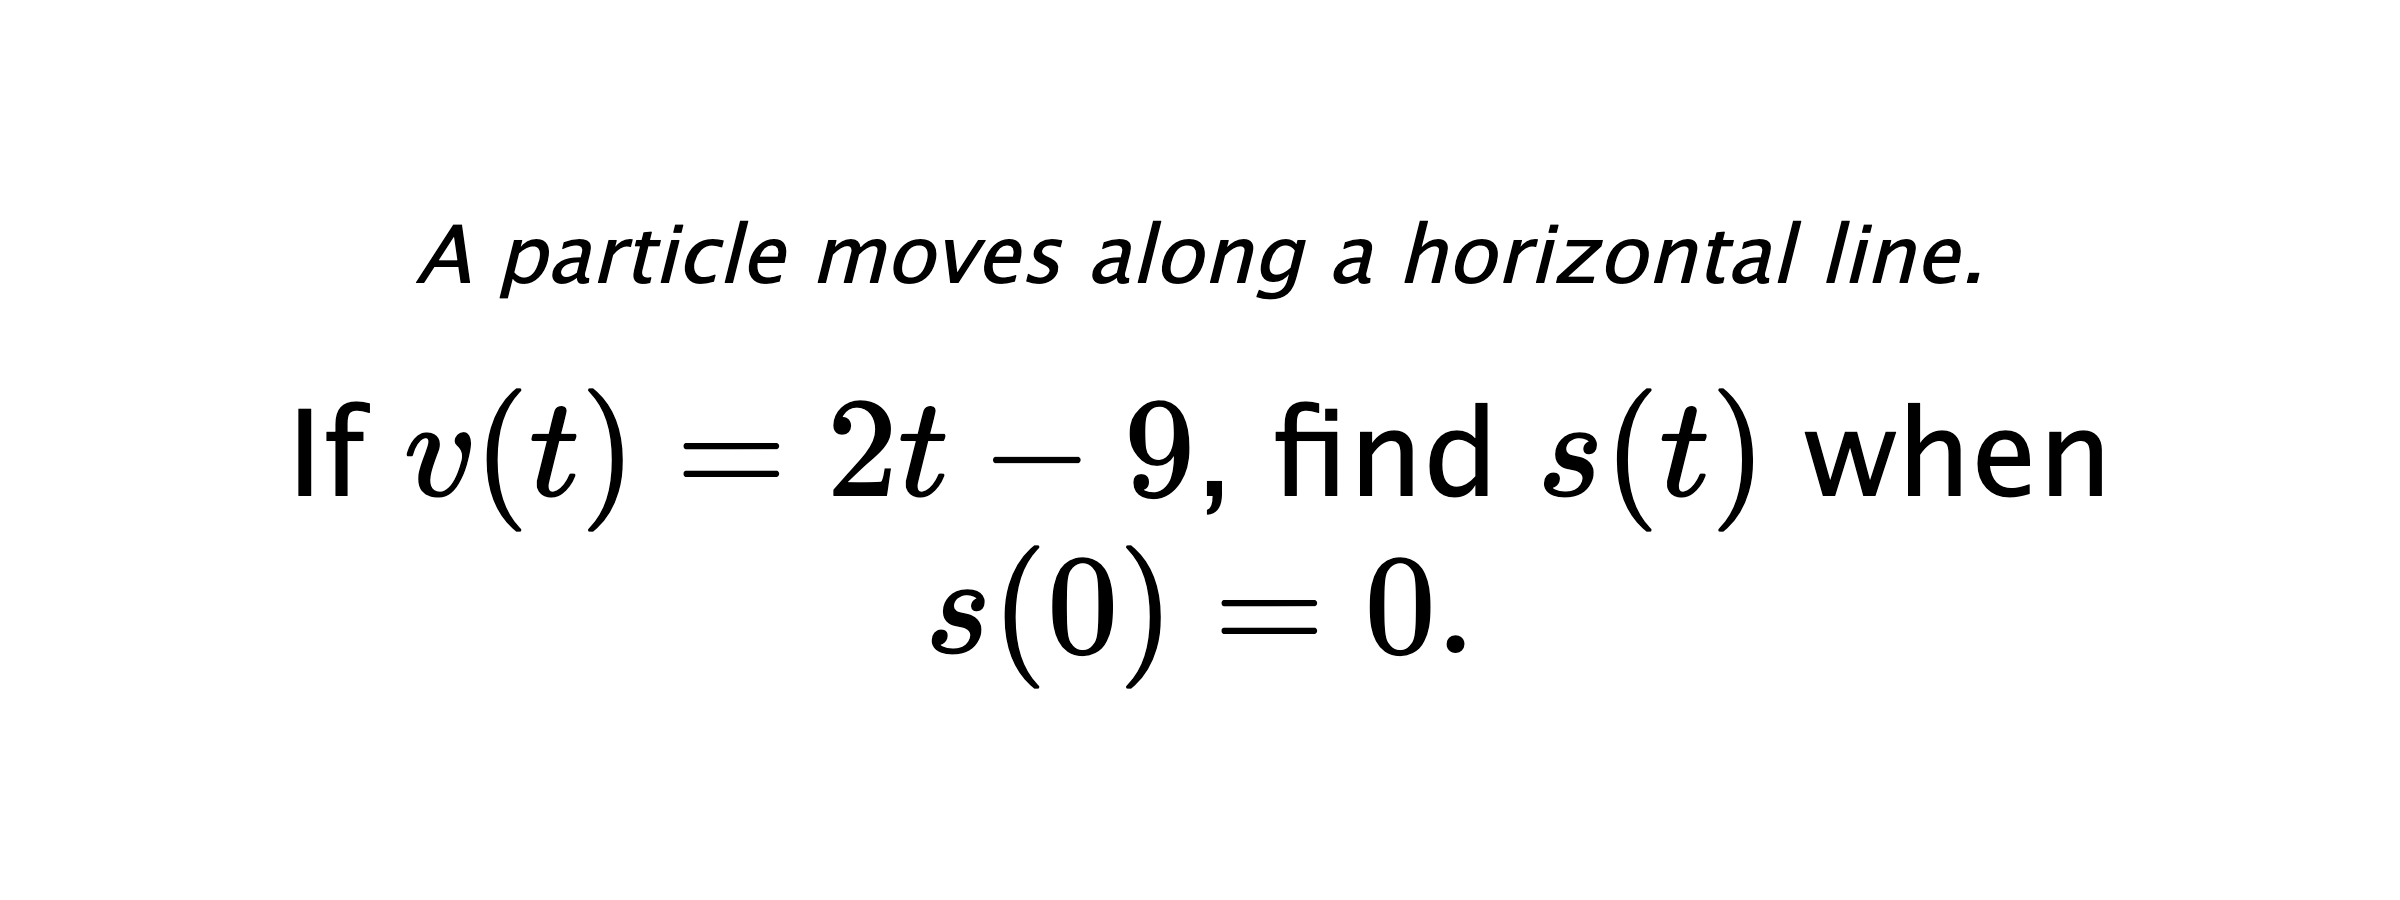 A particle moves along a horizontal line. If $ v(t)=2t-9 $, find $ s(t) $ when $ s(0)=0 .$